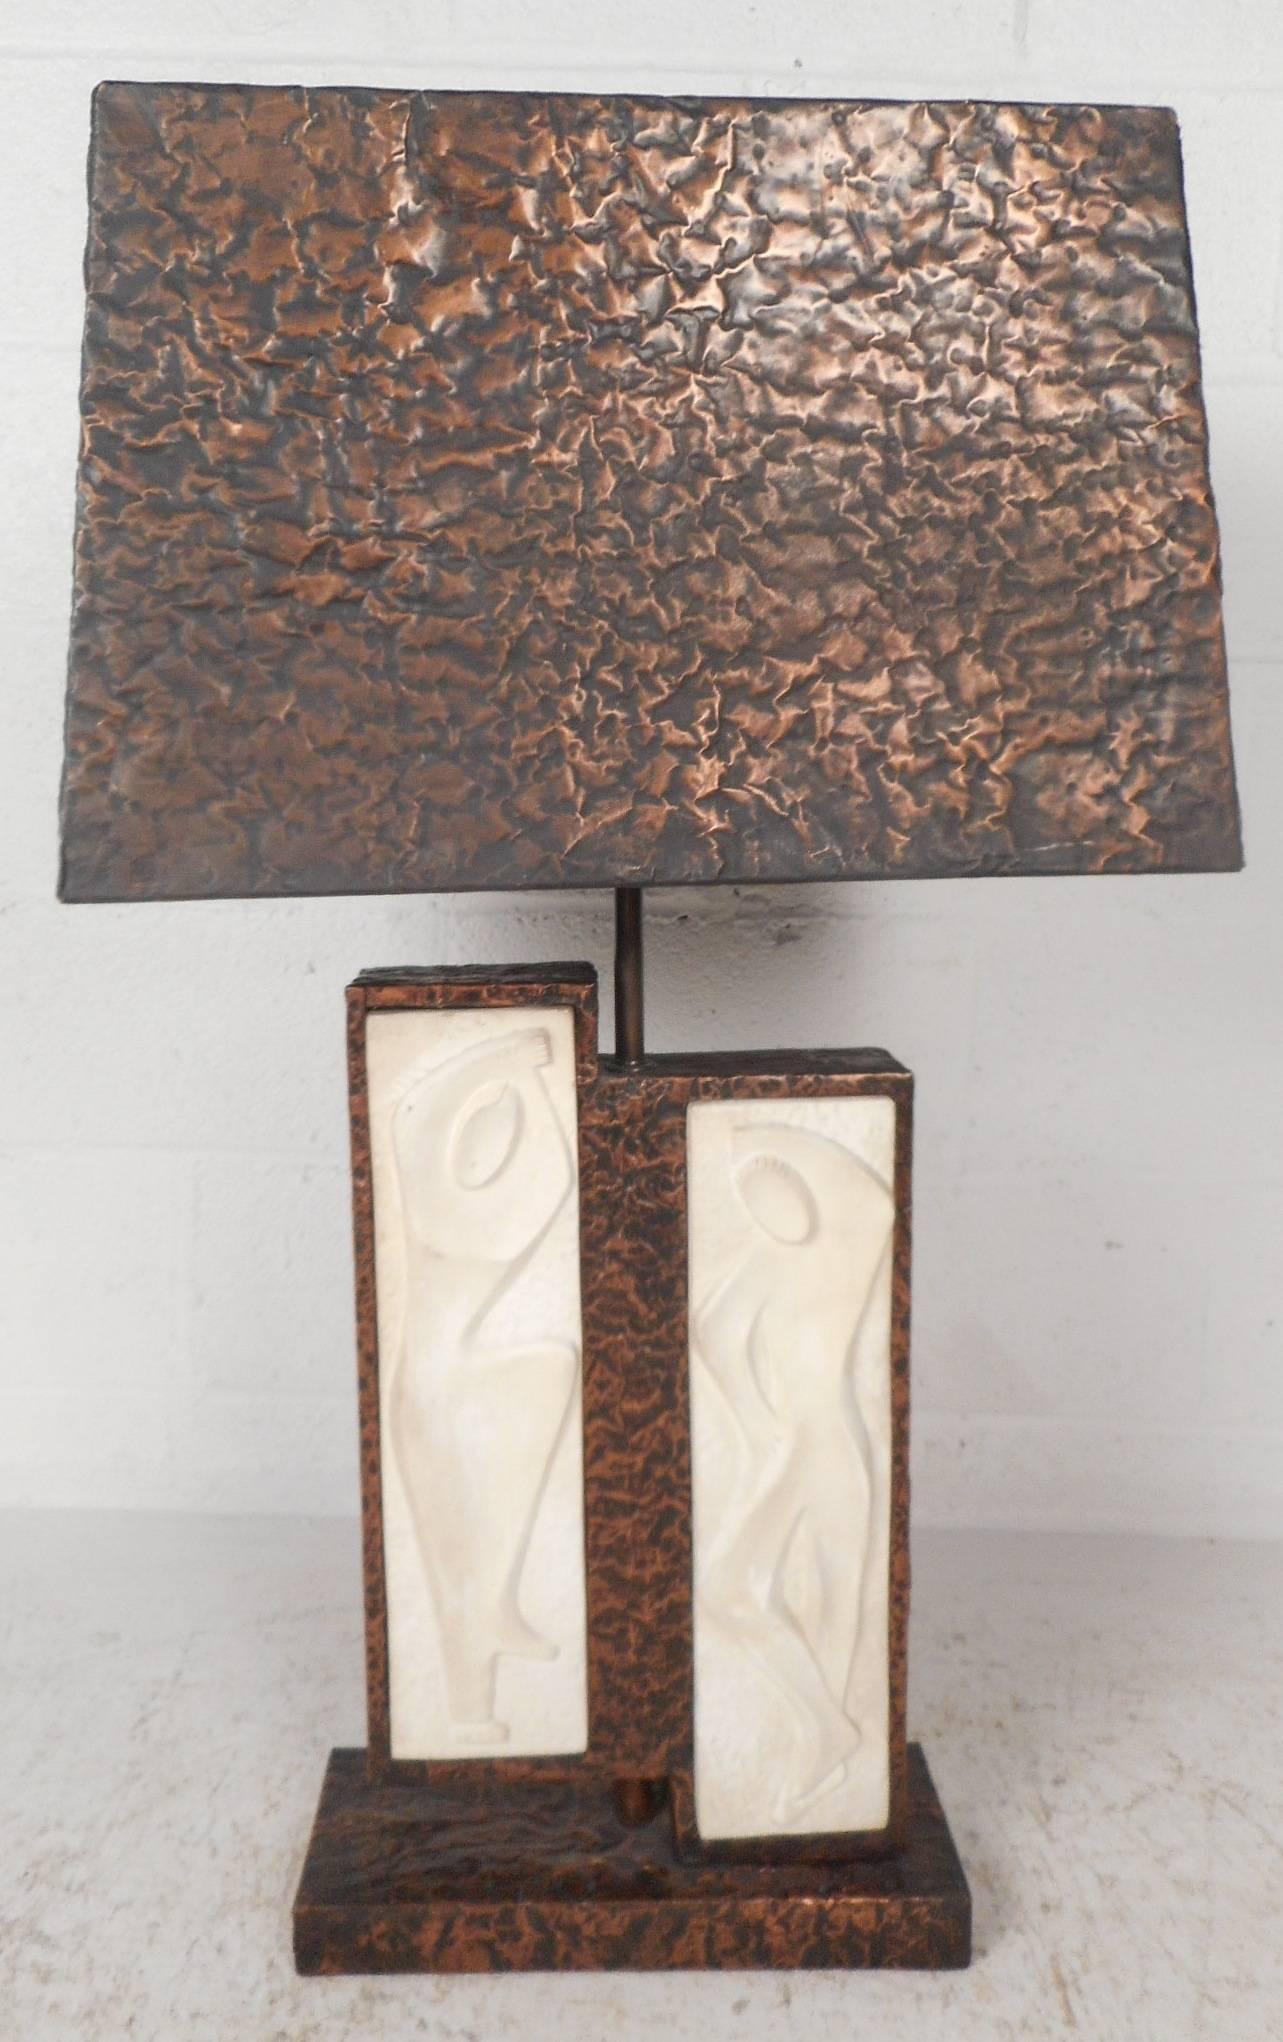 This stunning vintage modern table lamp features stylish designs on the front with a copper frame and shade. Sleek design has two spots for bulbs ensuring maximum lighting in any setting. Please confirm item location (NY or NJ). 

Measures: Lamp